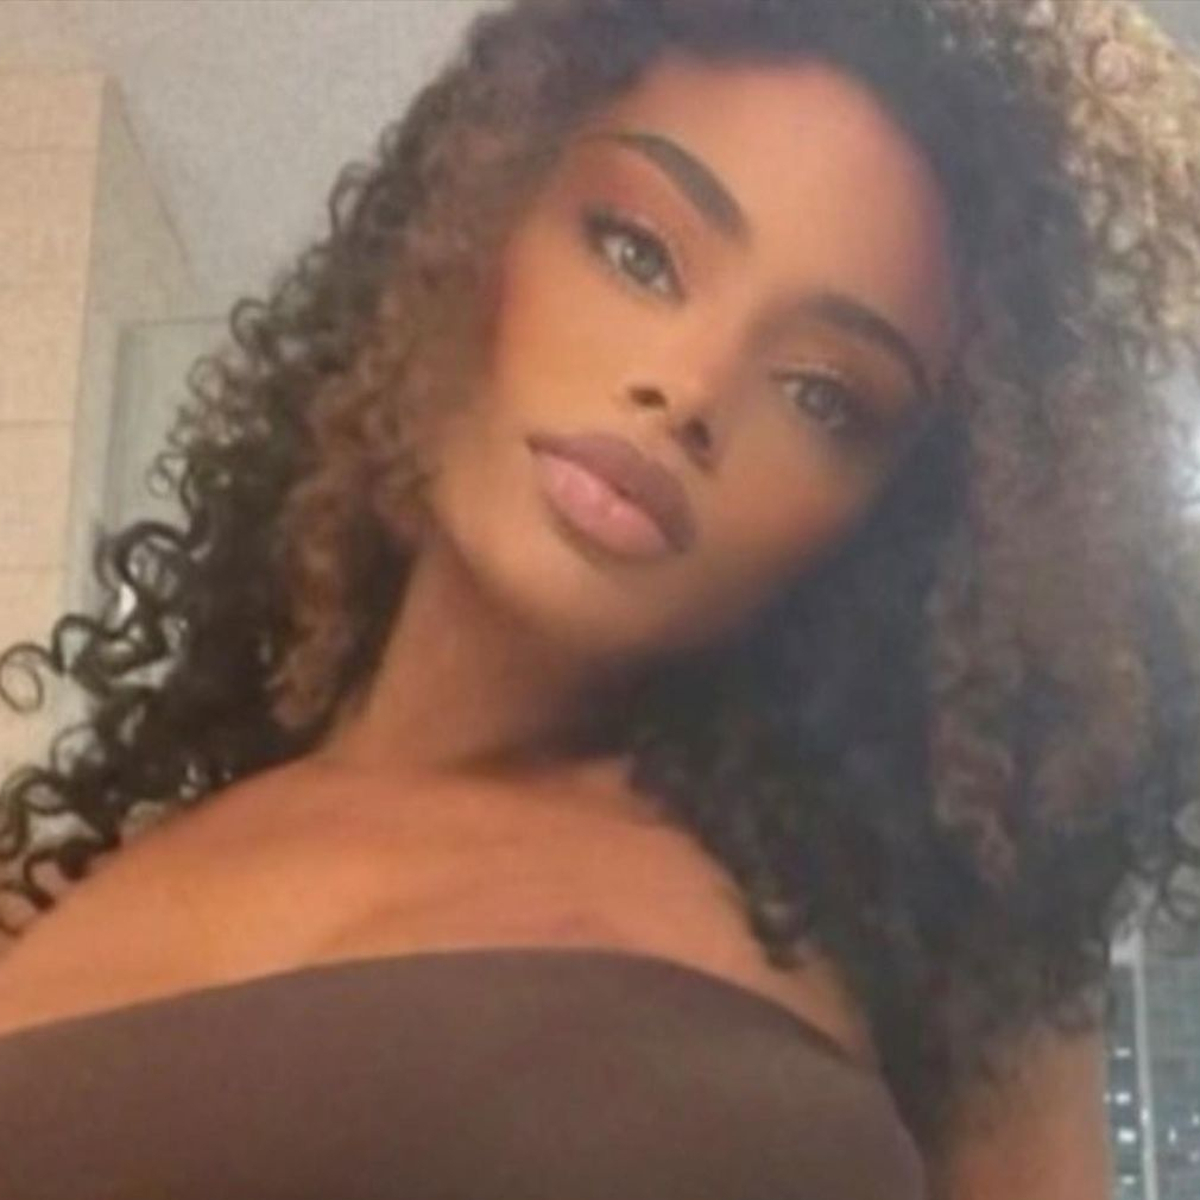 Suspect Facing Murder Charges for Model’s Death